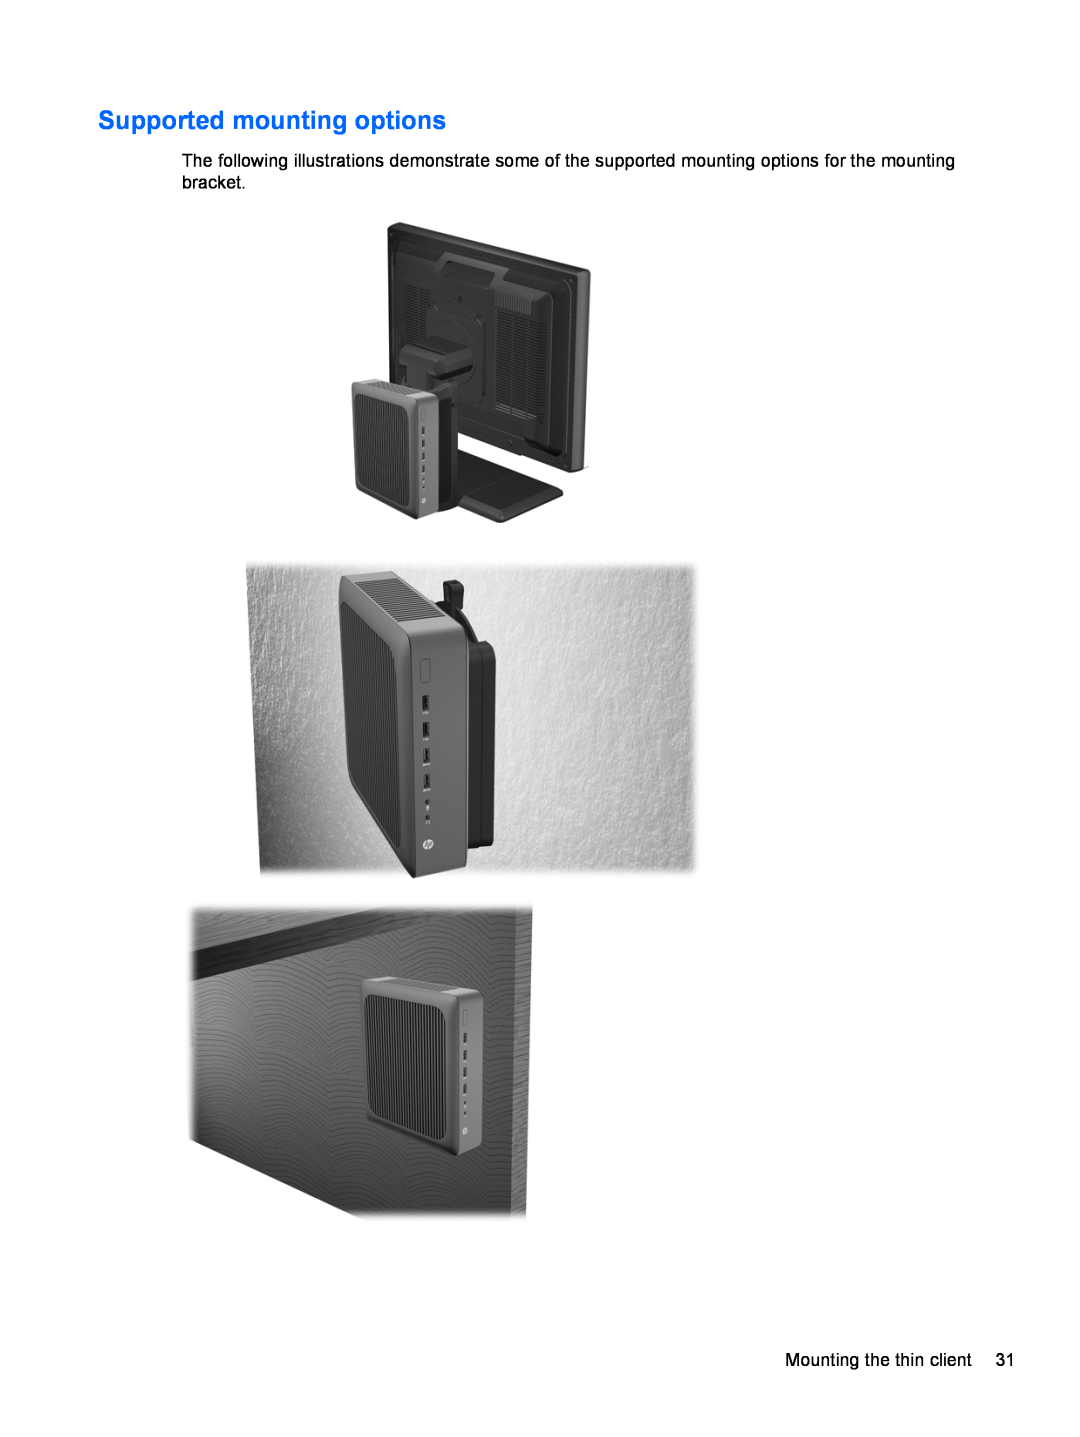 HP ZBook 14 Mobile manual Supported mounting options, Mounting the thin client 